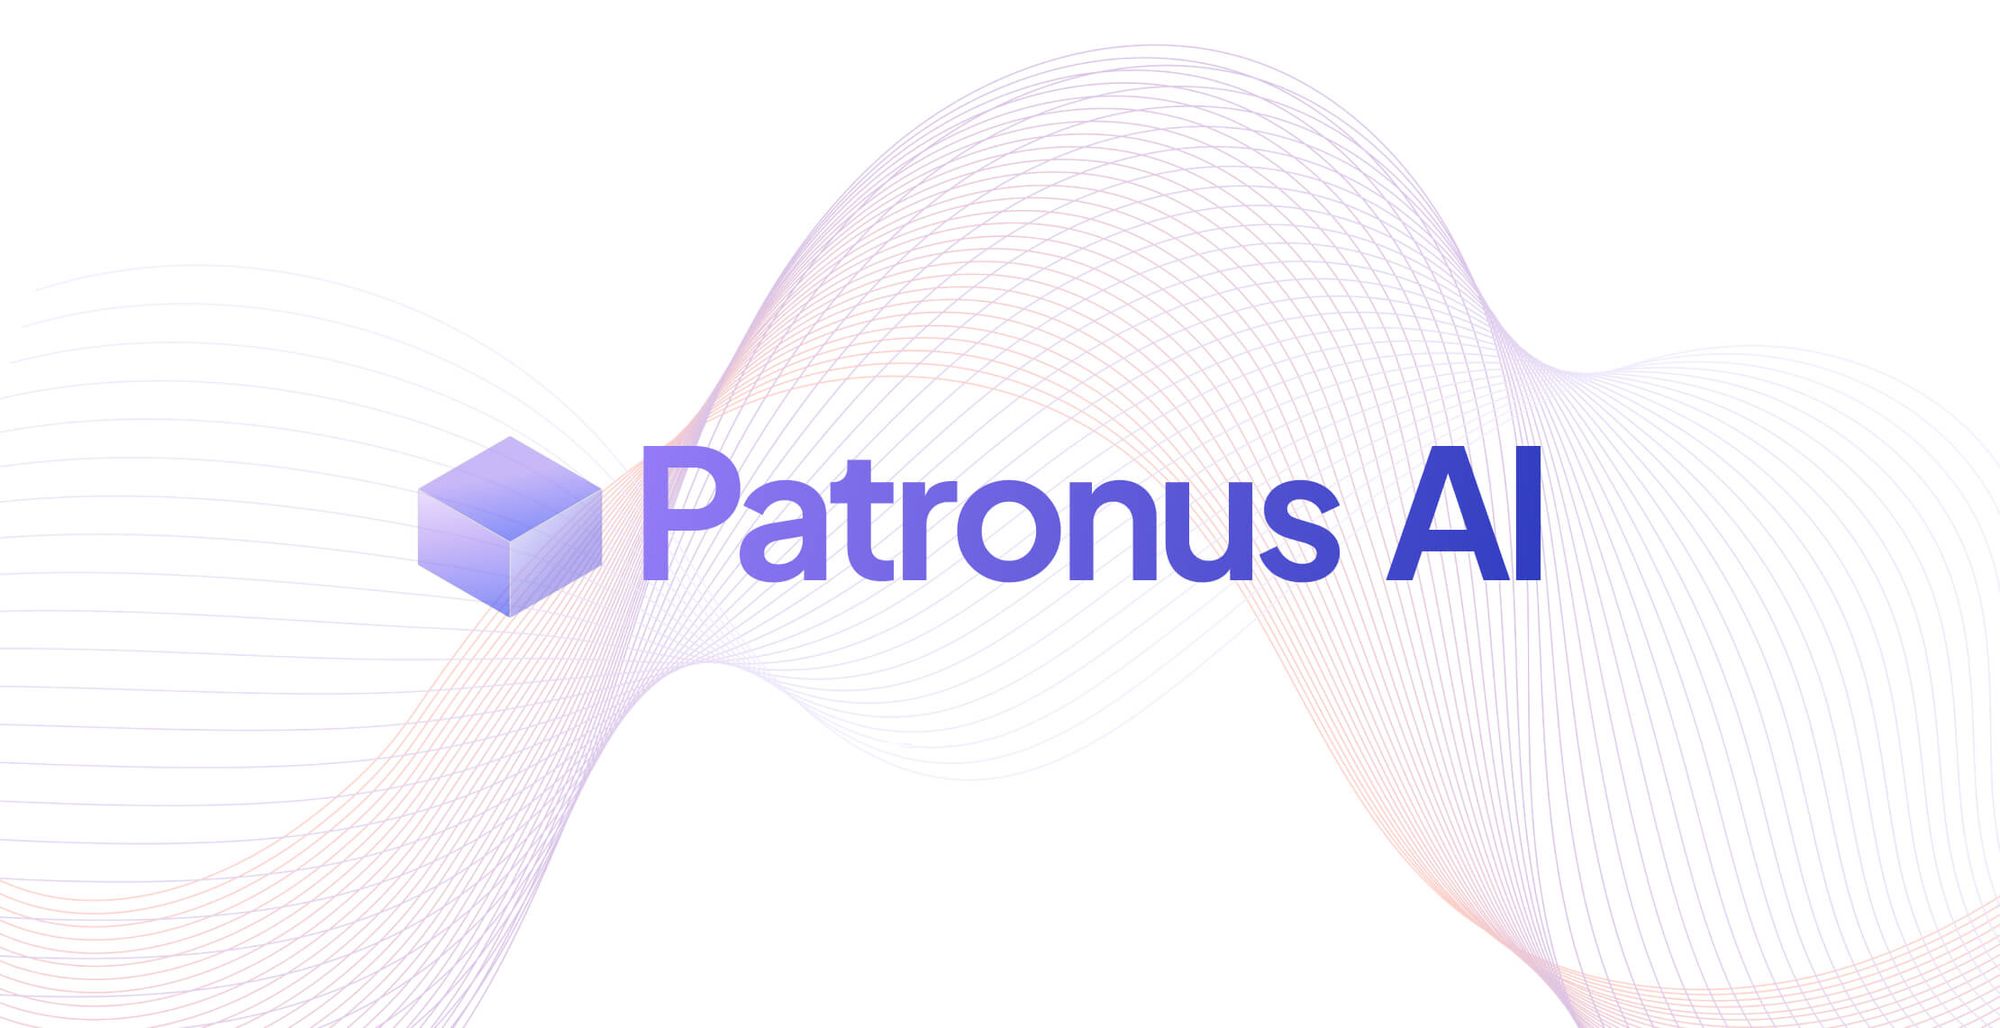 Automated evaluation and security platform startup Patronus AI launches with $3M in funding